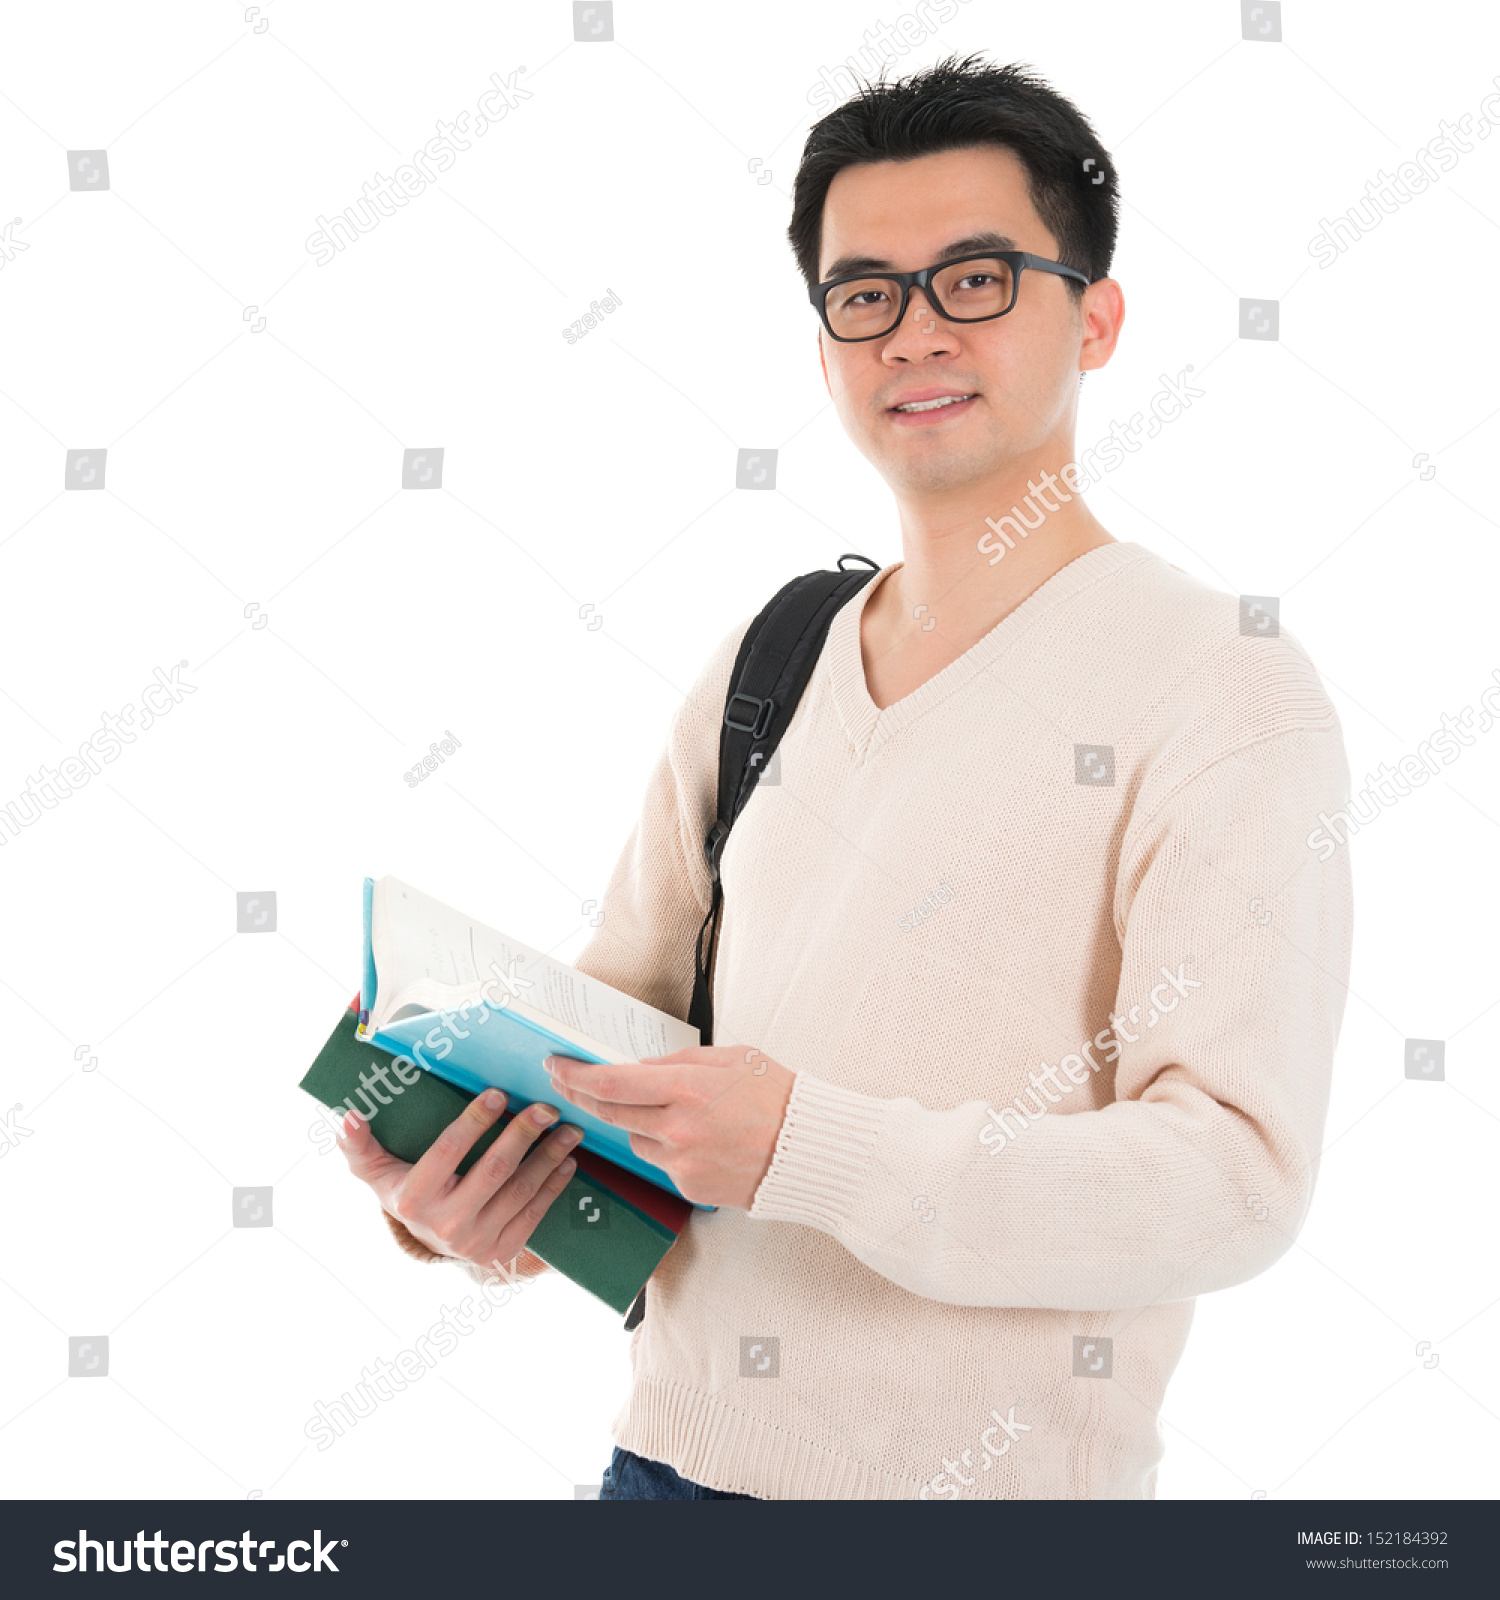 Asian Adult Male Student Casual Wear Stock Photo 152184392 ...